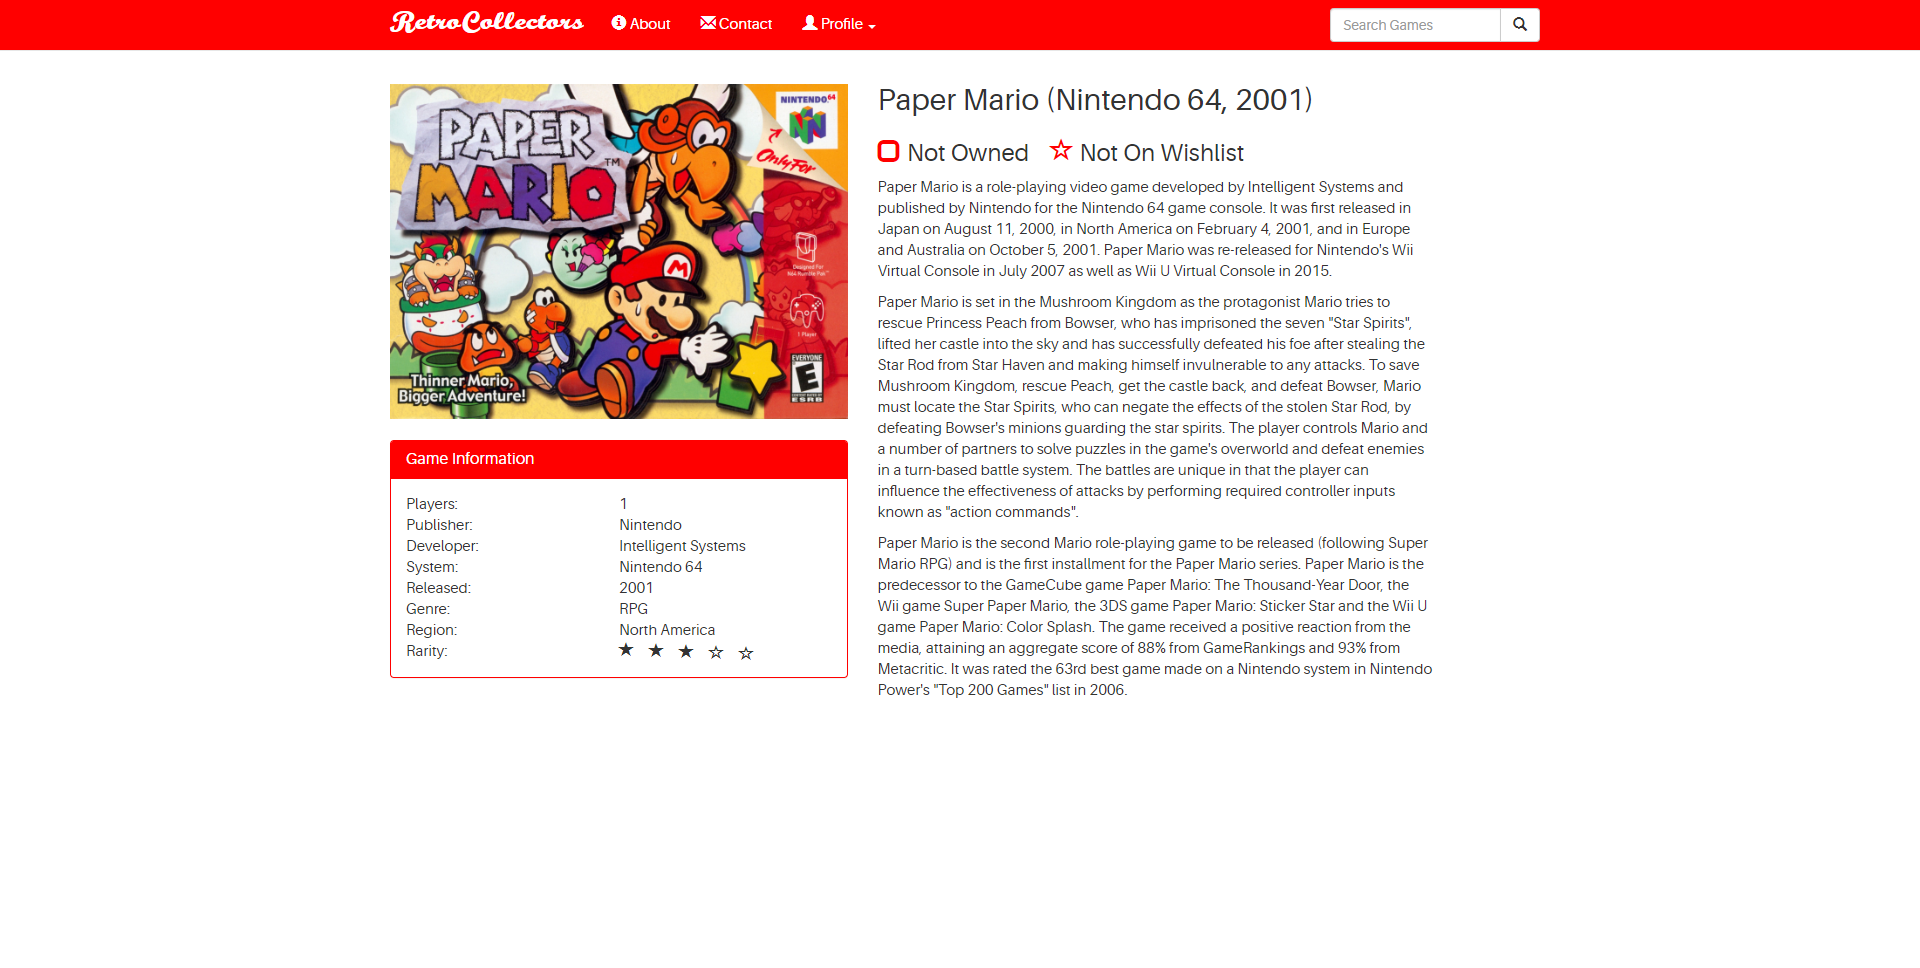 Image of a Retro Video Game Collectors Website